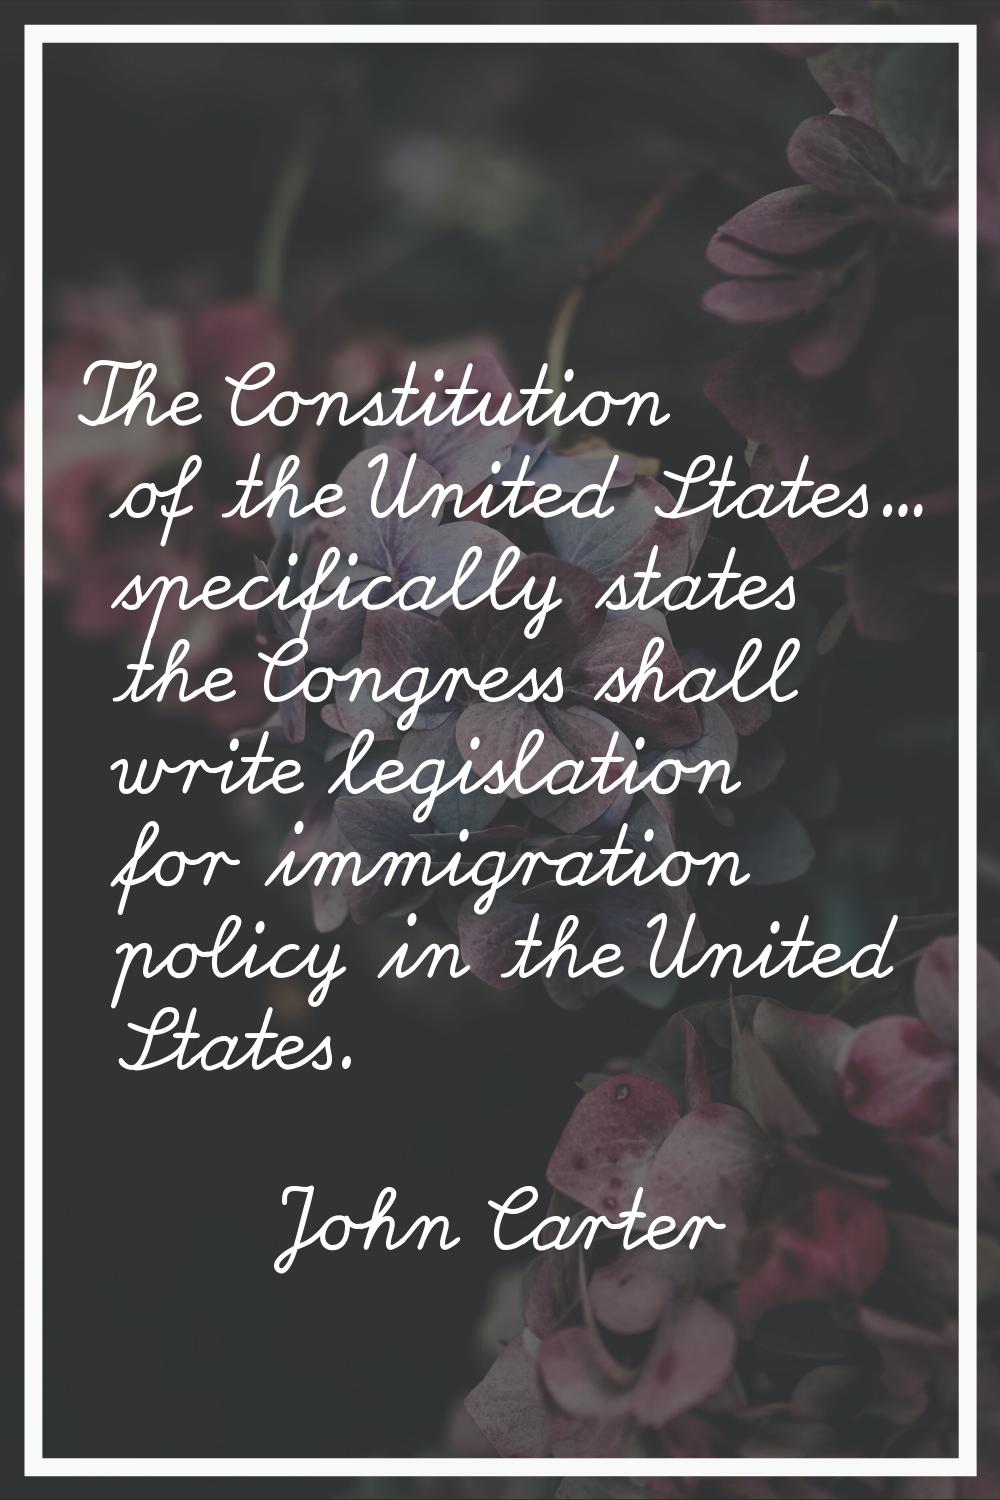 The Constitution of the United States... specifically states the Congress shall write legislation f